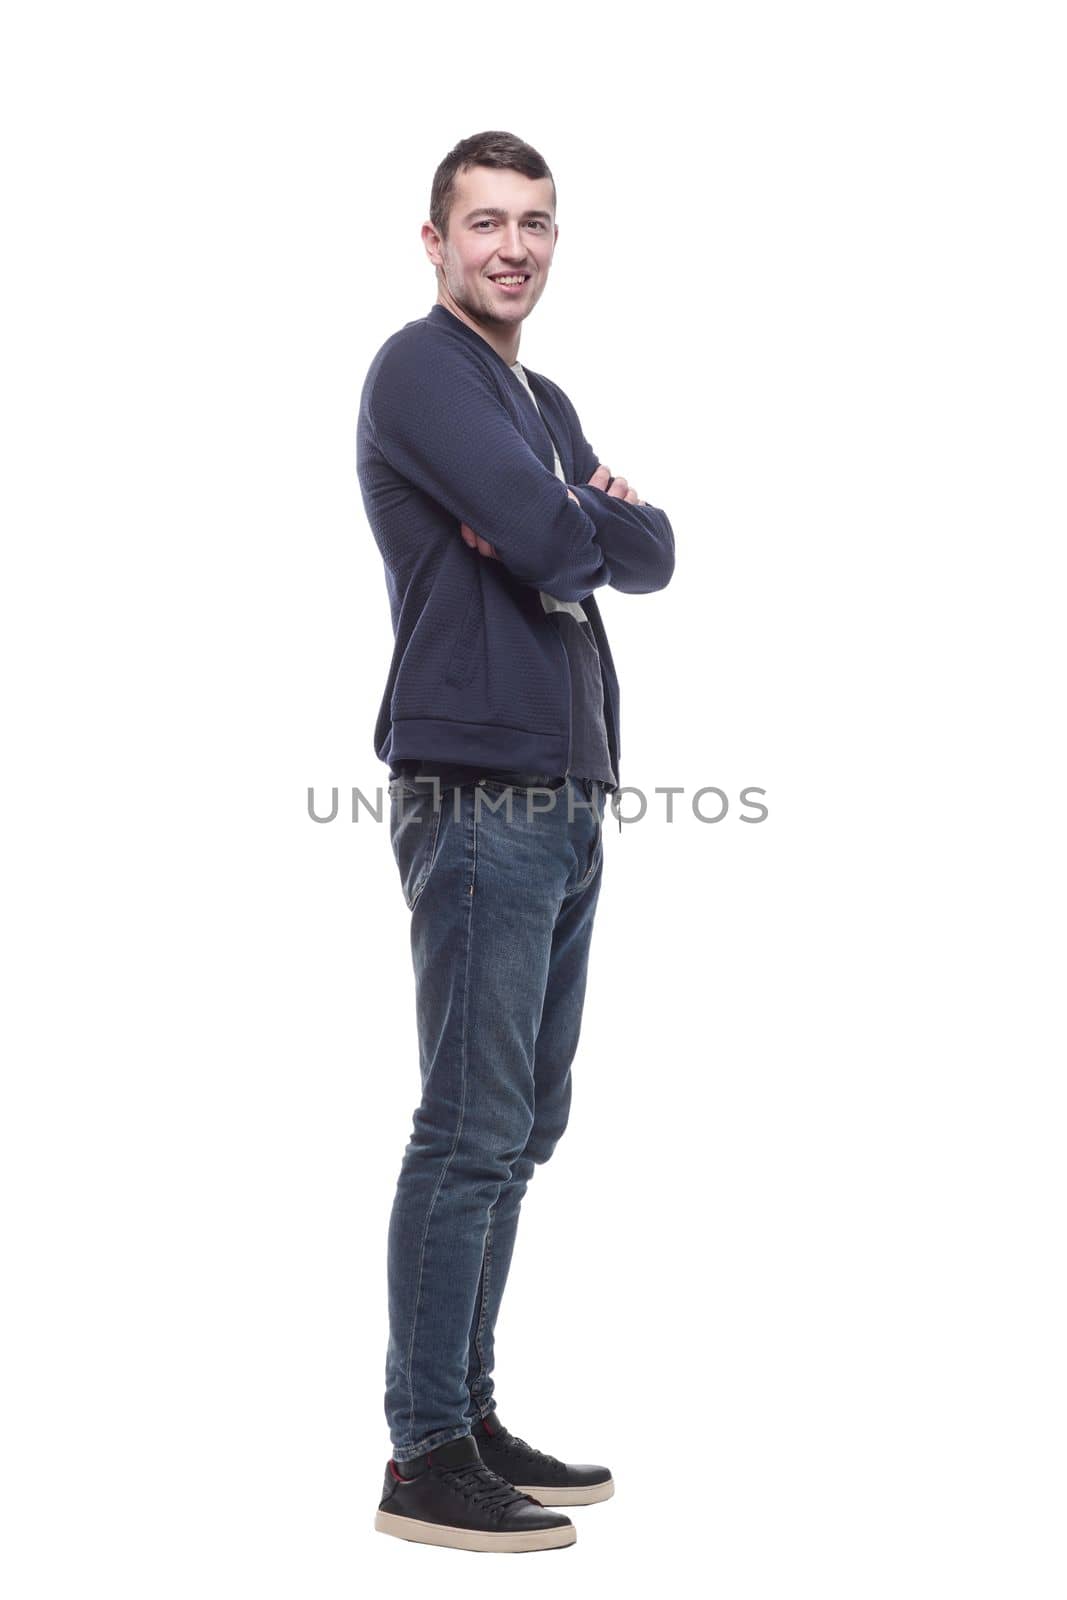 young man in jeans and a jacket . isolated on a white background.